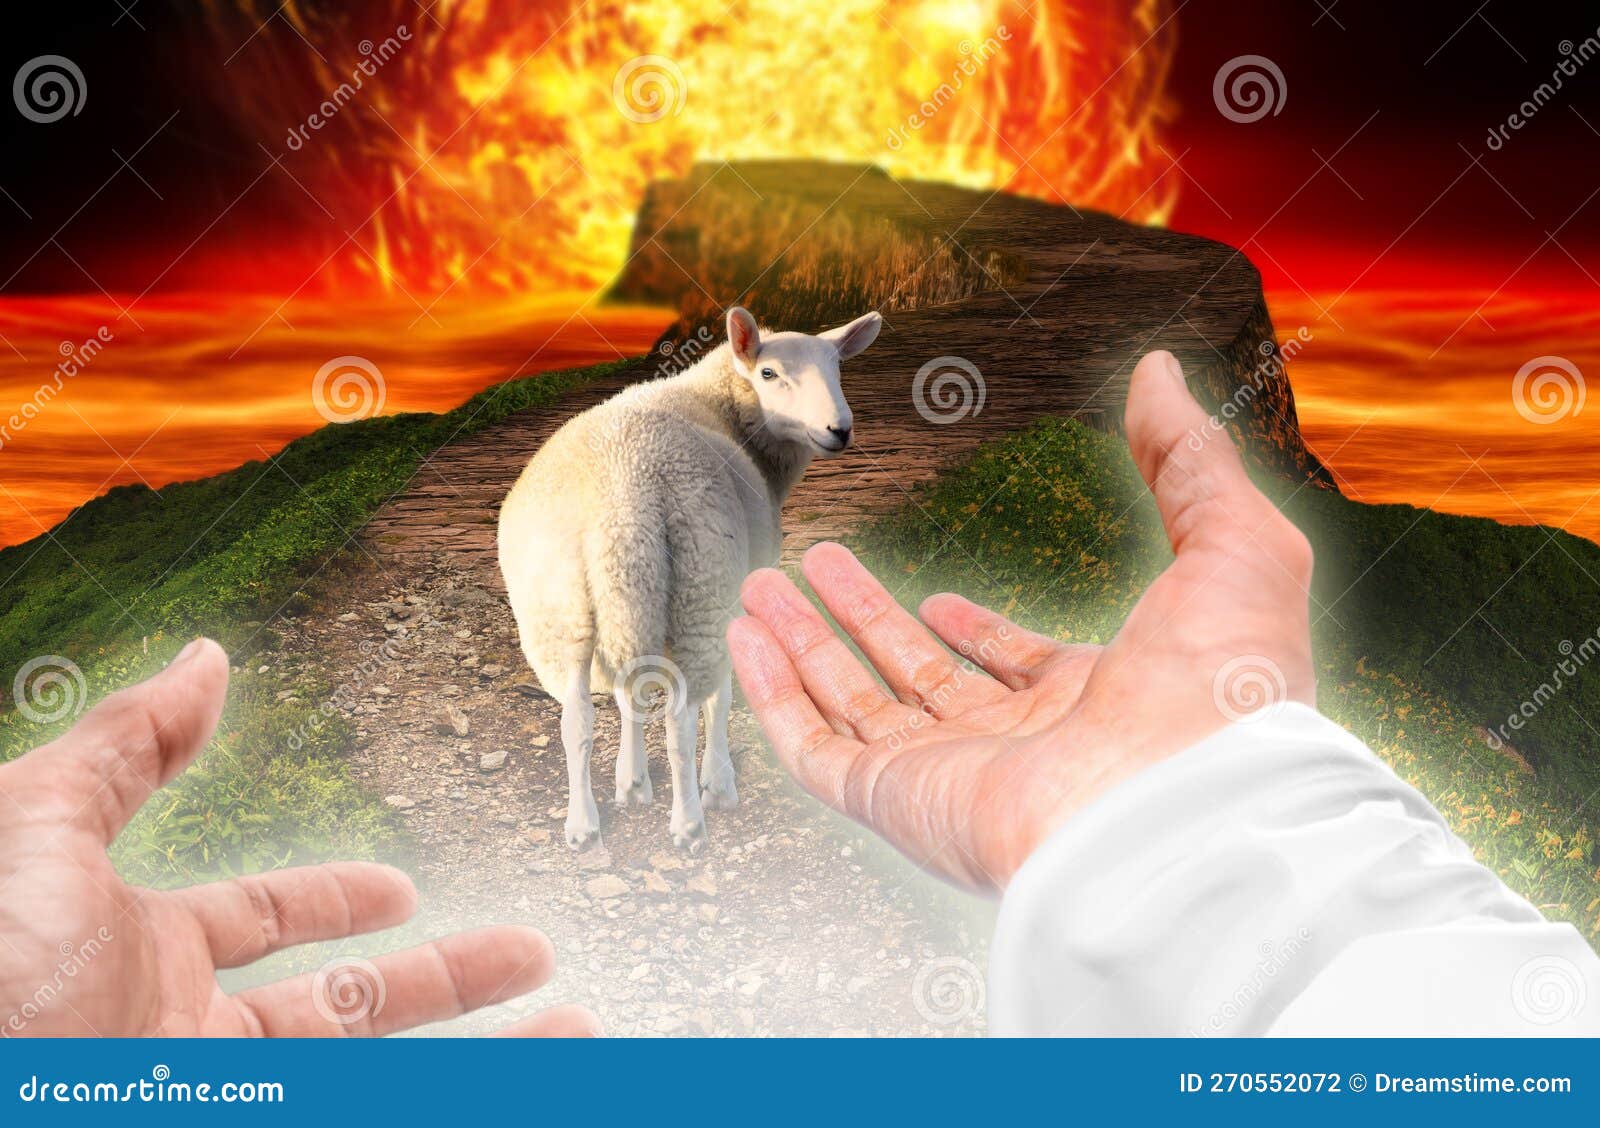 god saves the sheep from hell and calls it to follow him